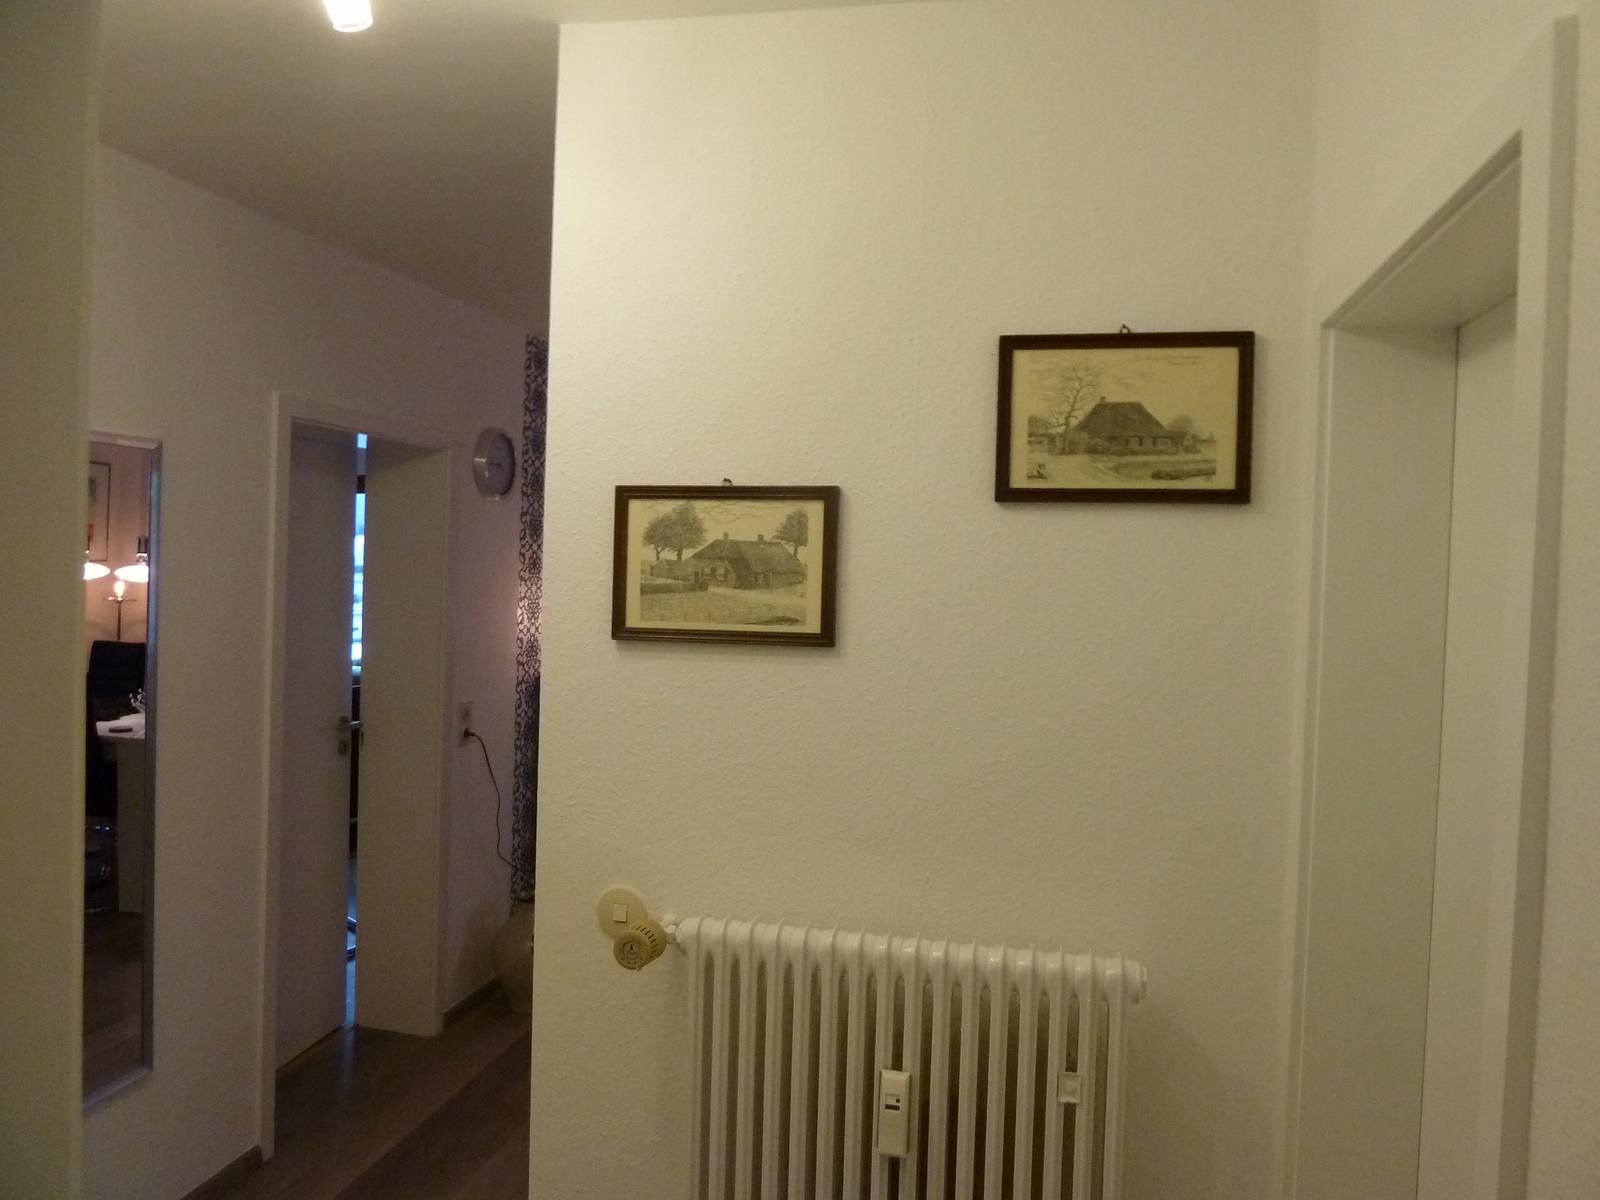 Pictures of the room